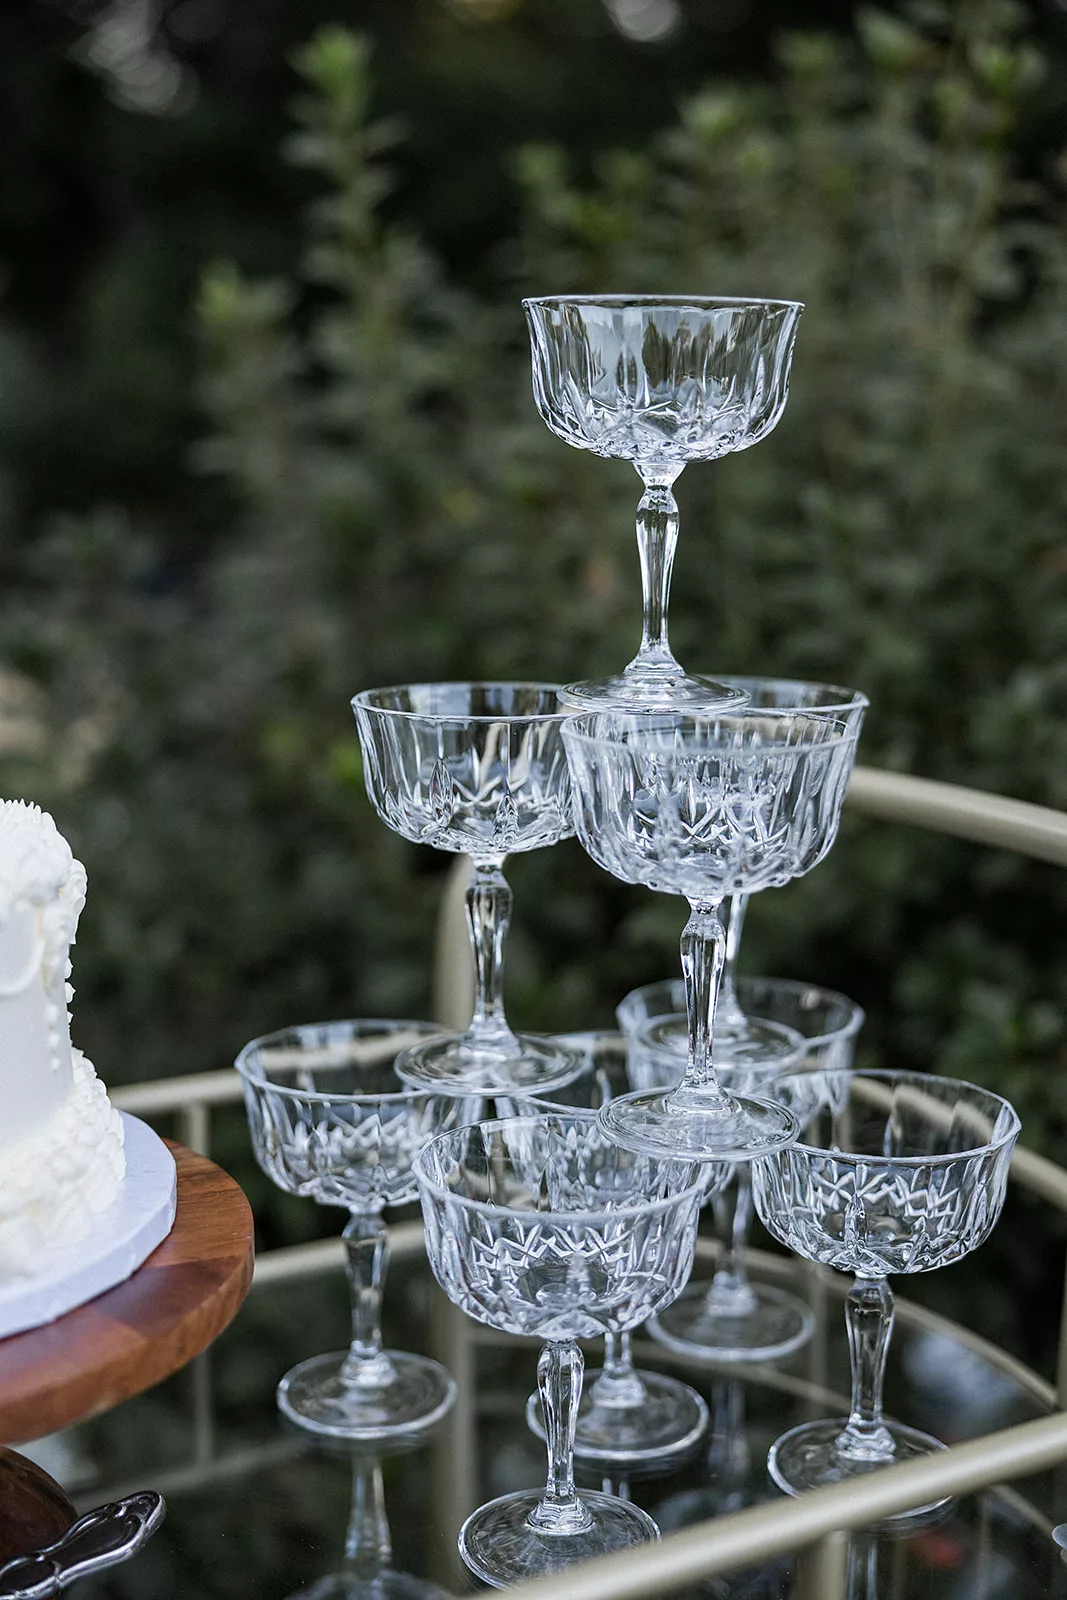 Details of a stack of crystal glasses on a cake cart in a garden